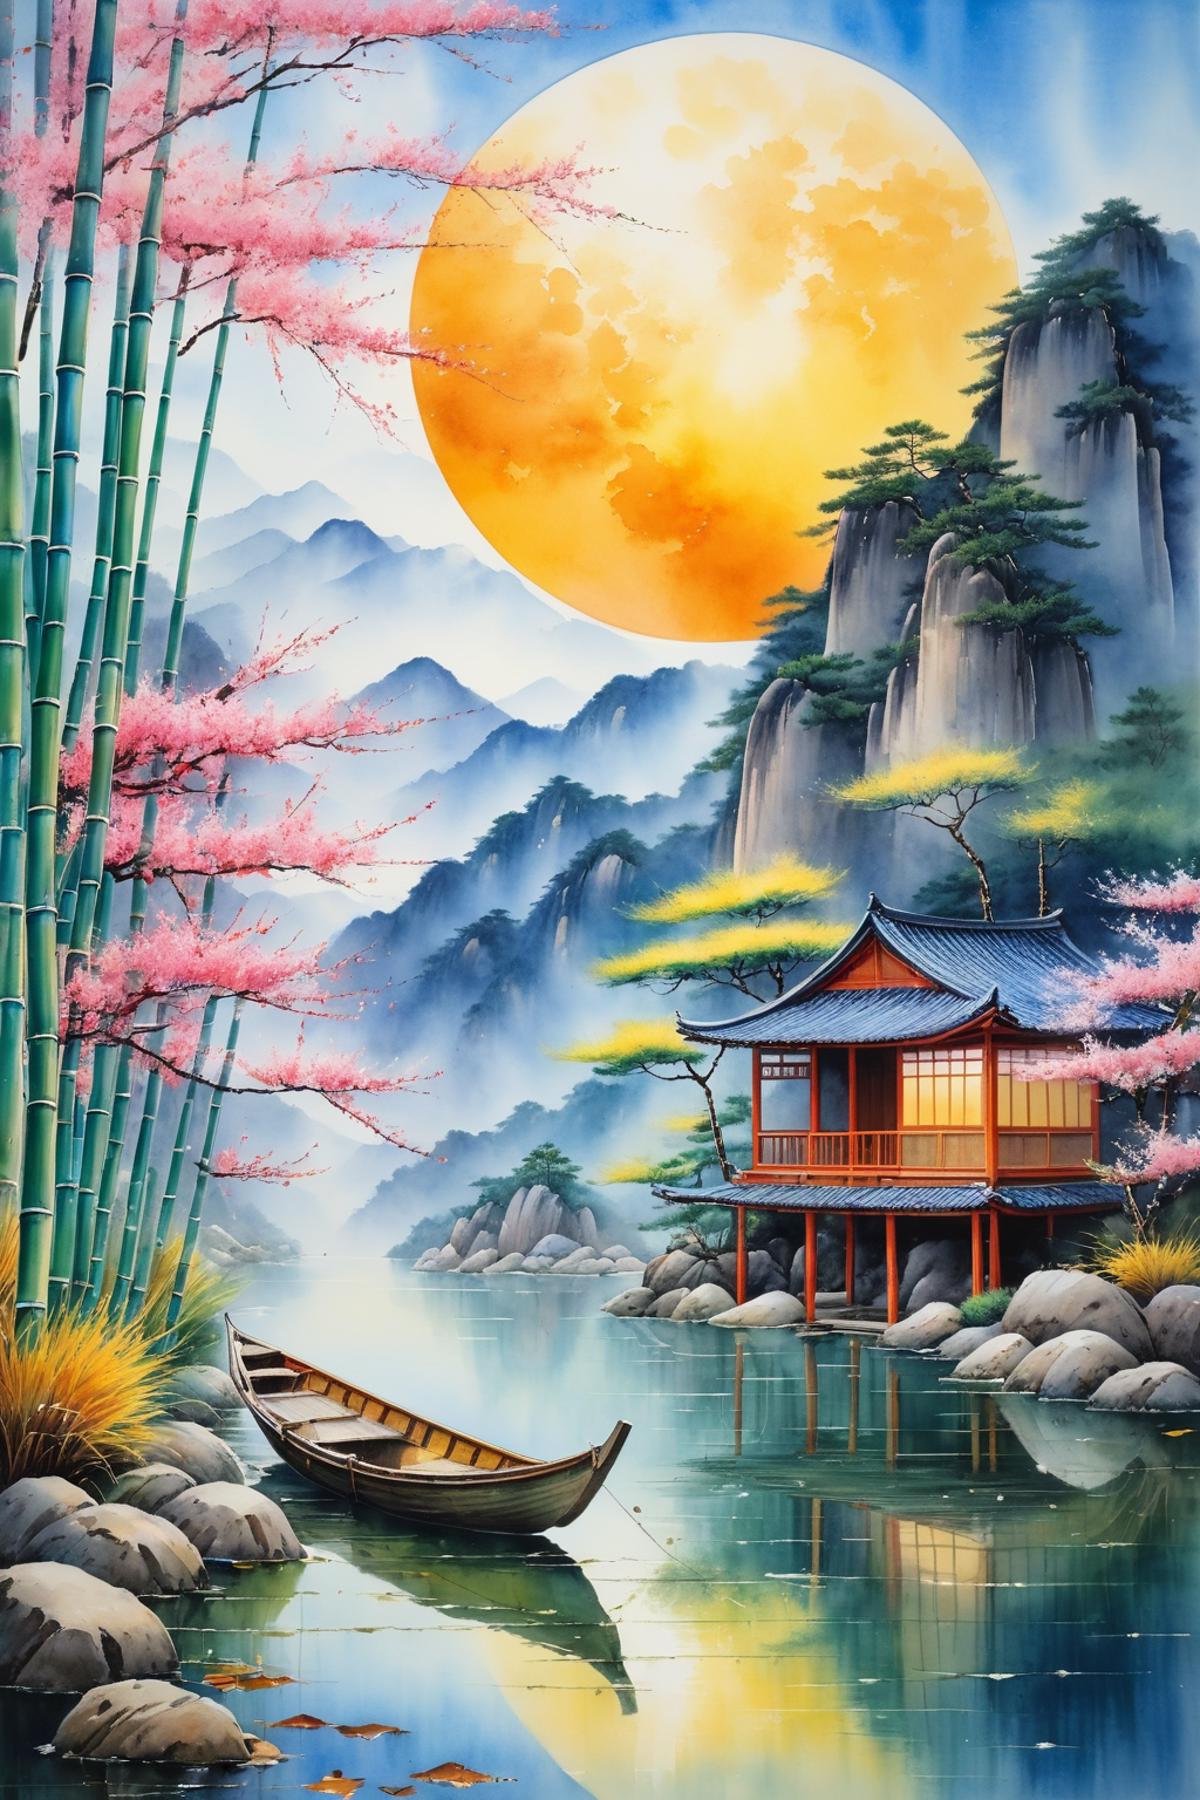 A painting of a boat on the water next to a Japanese-style building with a moon in the background.